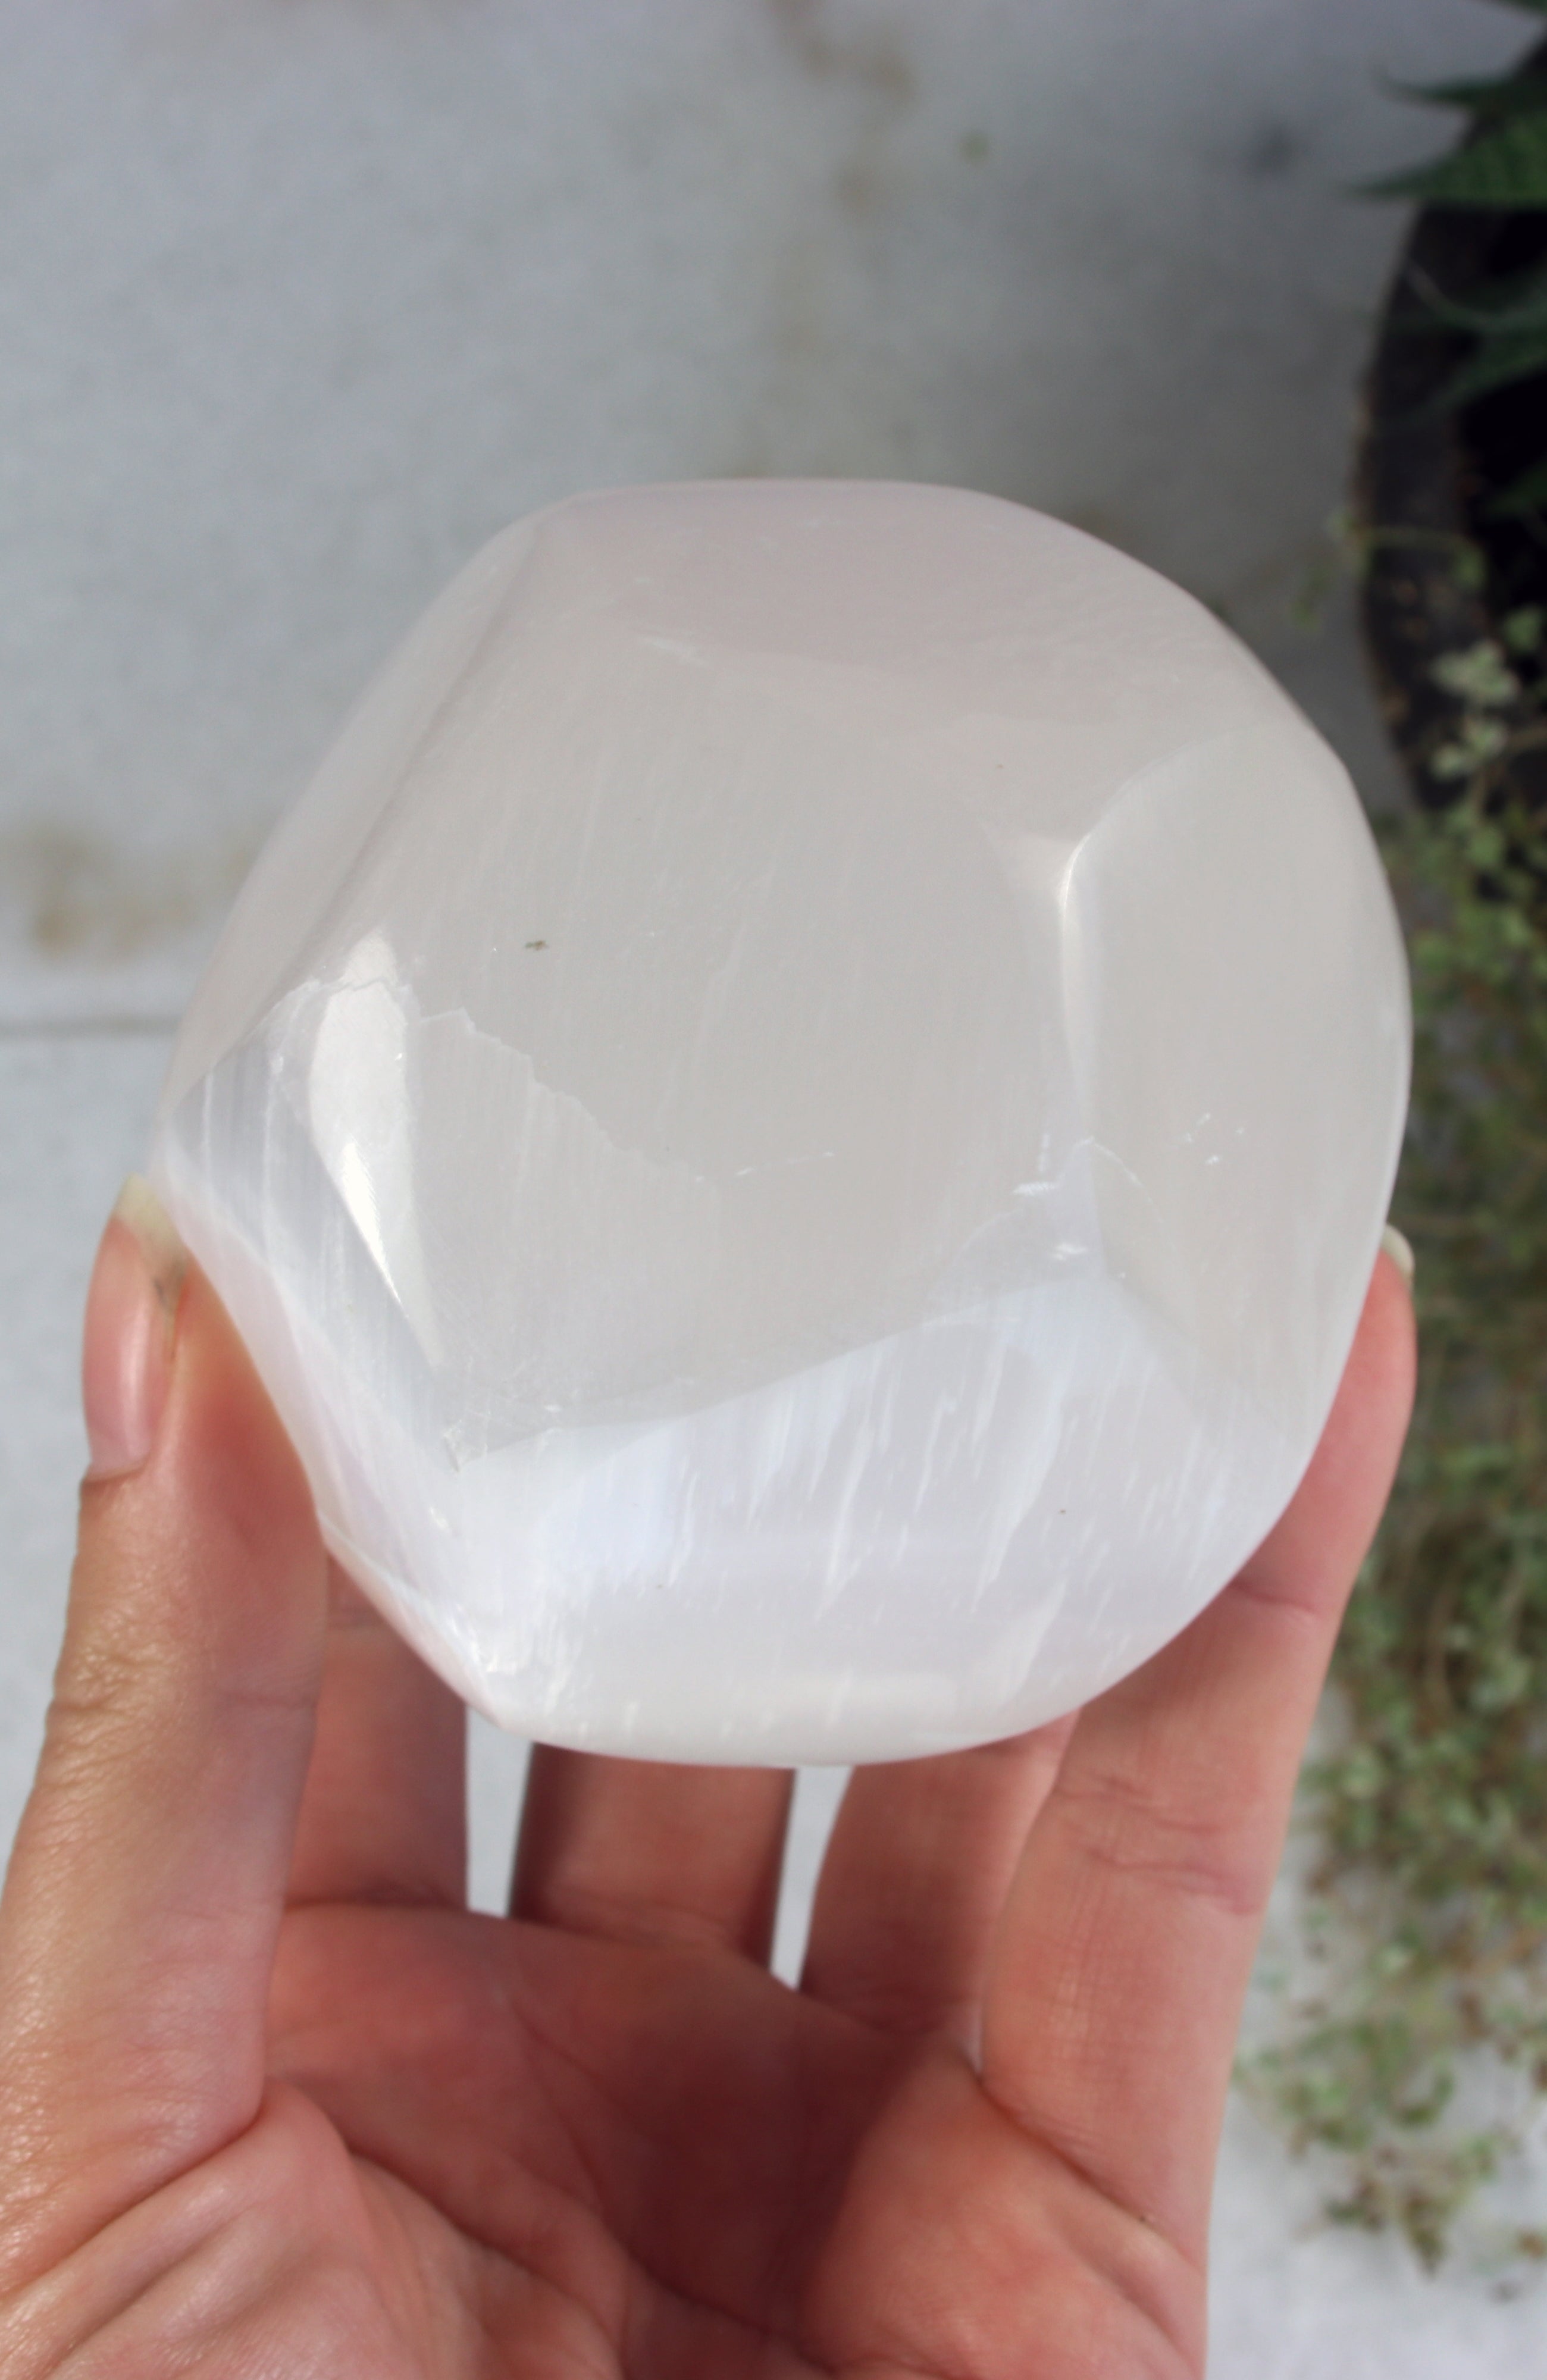 Selenite Dodecahedron